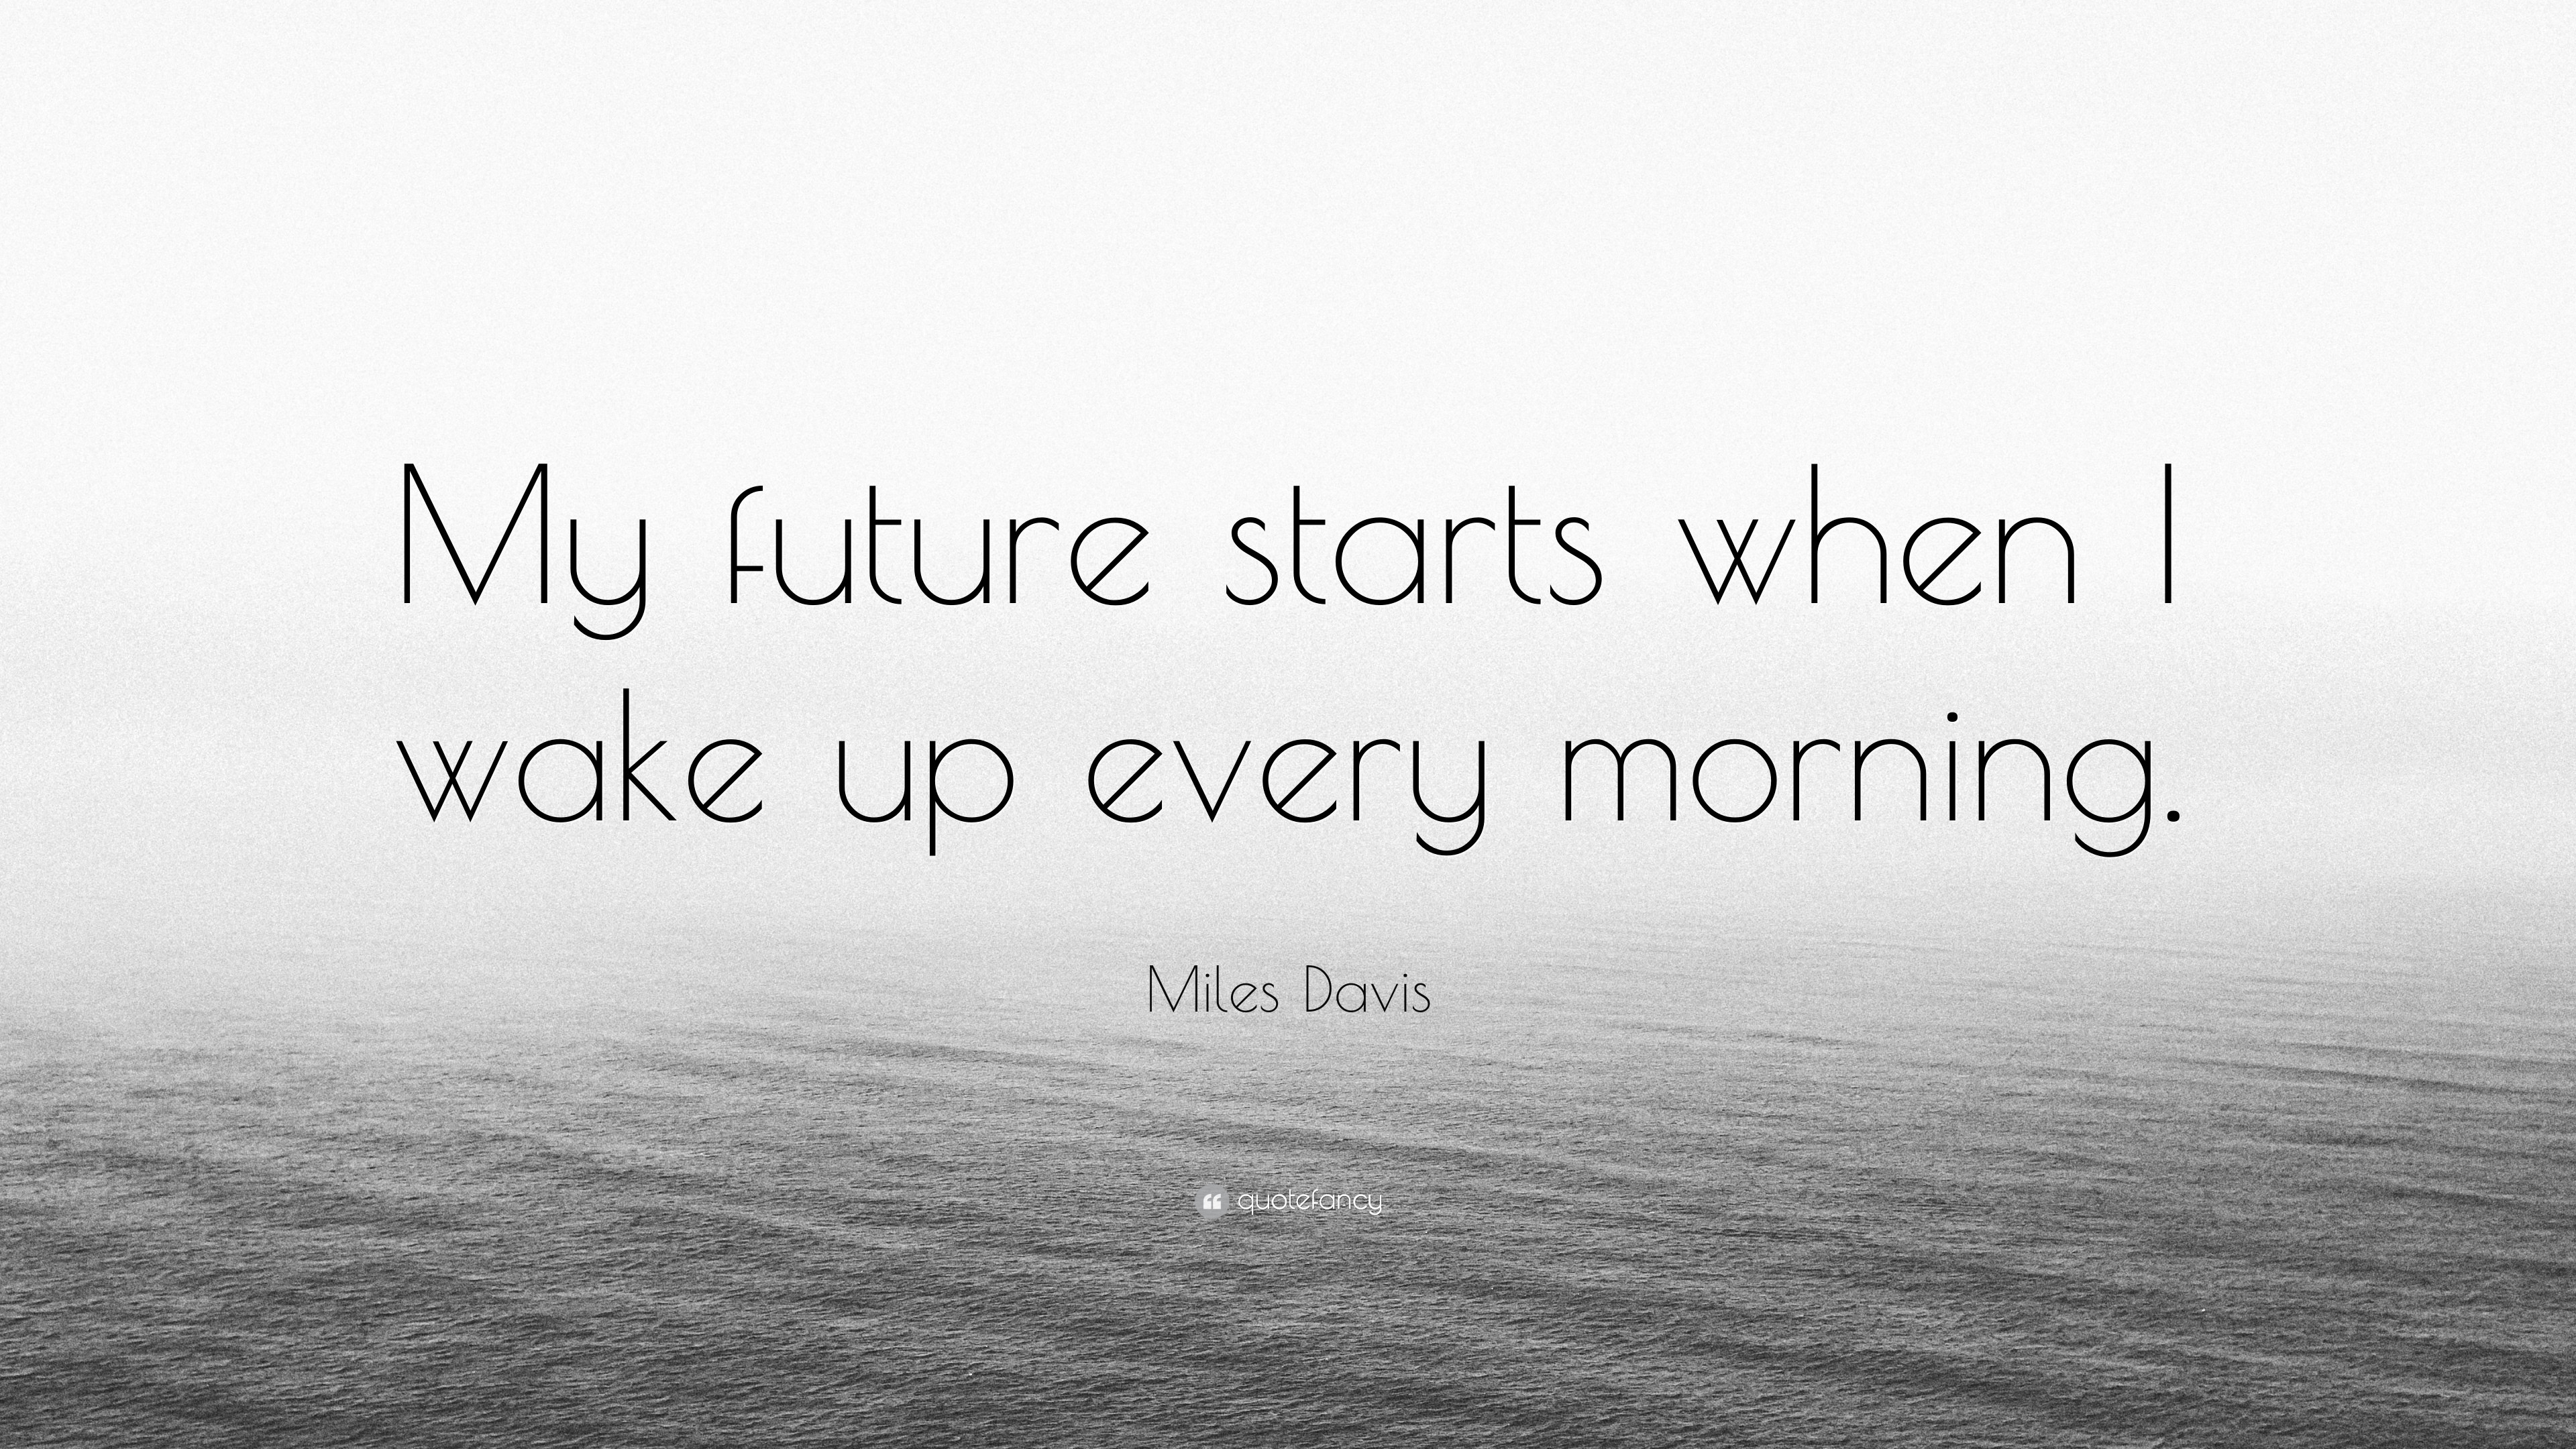 3840x2160 Miles Davis Quote: “My future starts when I wake up every morning.”